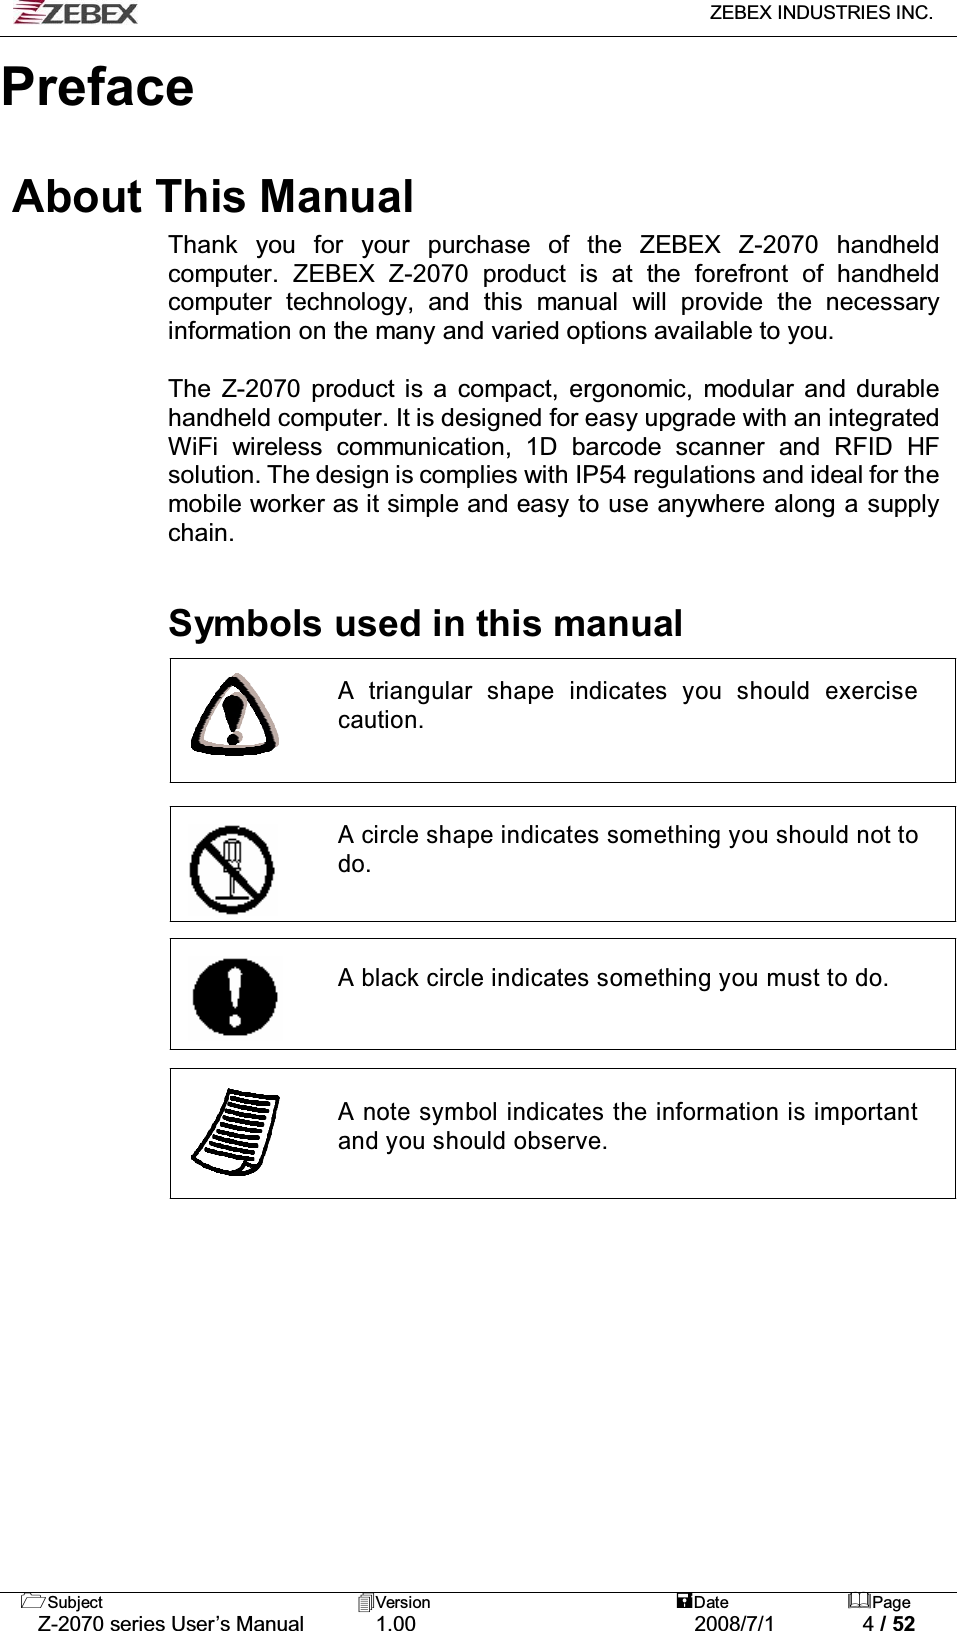   ZEBEX INDUSTRIES INC.   Subject Version  Date Page   Z-2070 series User’s Manual  1.00  2008/7/1  4 / 52     Preface  About This Manual Thank you for your purchase of the ZEBEX Z-2070 handheld computer. ZEBEX Z-2070 product is at the forefront of handheld computer technology, and this manual will provide the necessary information on the many and varied options available to you.  The Z-2070 product is a compact, ergonomic, modular and durable handheld computer. It is designed for easy upgrade with an integrated WiFi wireless communication, 1D barcode scanner and RFID HF solution. The design is complies with IP54 regulations and ideal for the mobile worker as it simple and easy to use anywhere along a supply chain.    Symbols used in this manual  A triangular shape indicates you should exercise caution.     A circle shape indicates something you should not to do.     A black circle indicates something you must to do.      A note symbol indicates the information is important and you should observe.                    